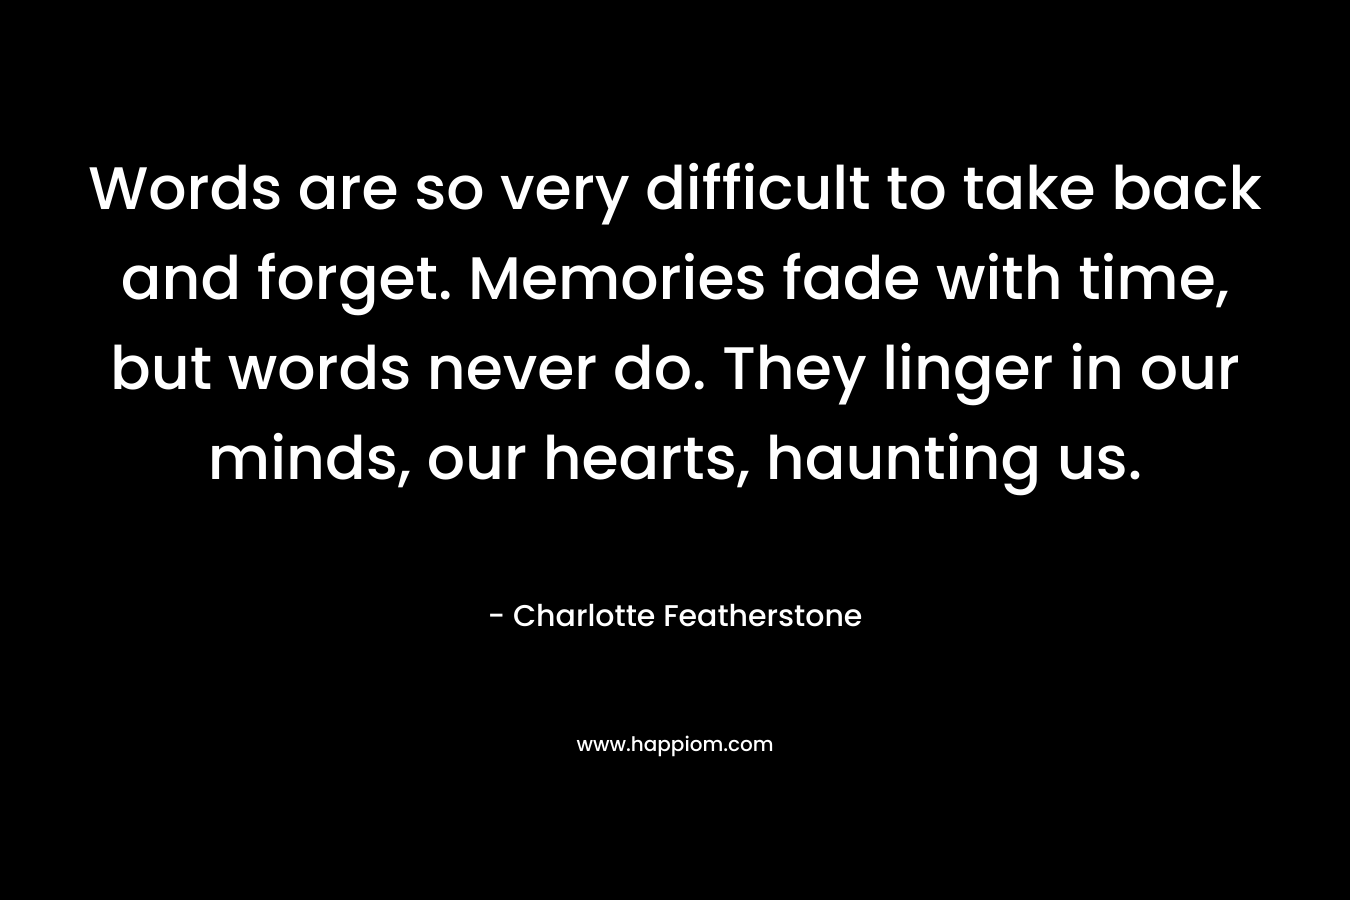 Words are so very difficult to take back and forget. Memories fade with time, but words never do. They linger in our minds, our hearts, haunting us. – Charlotte Featherstone